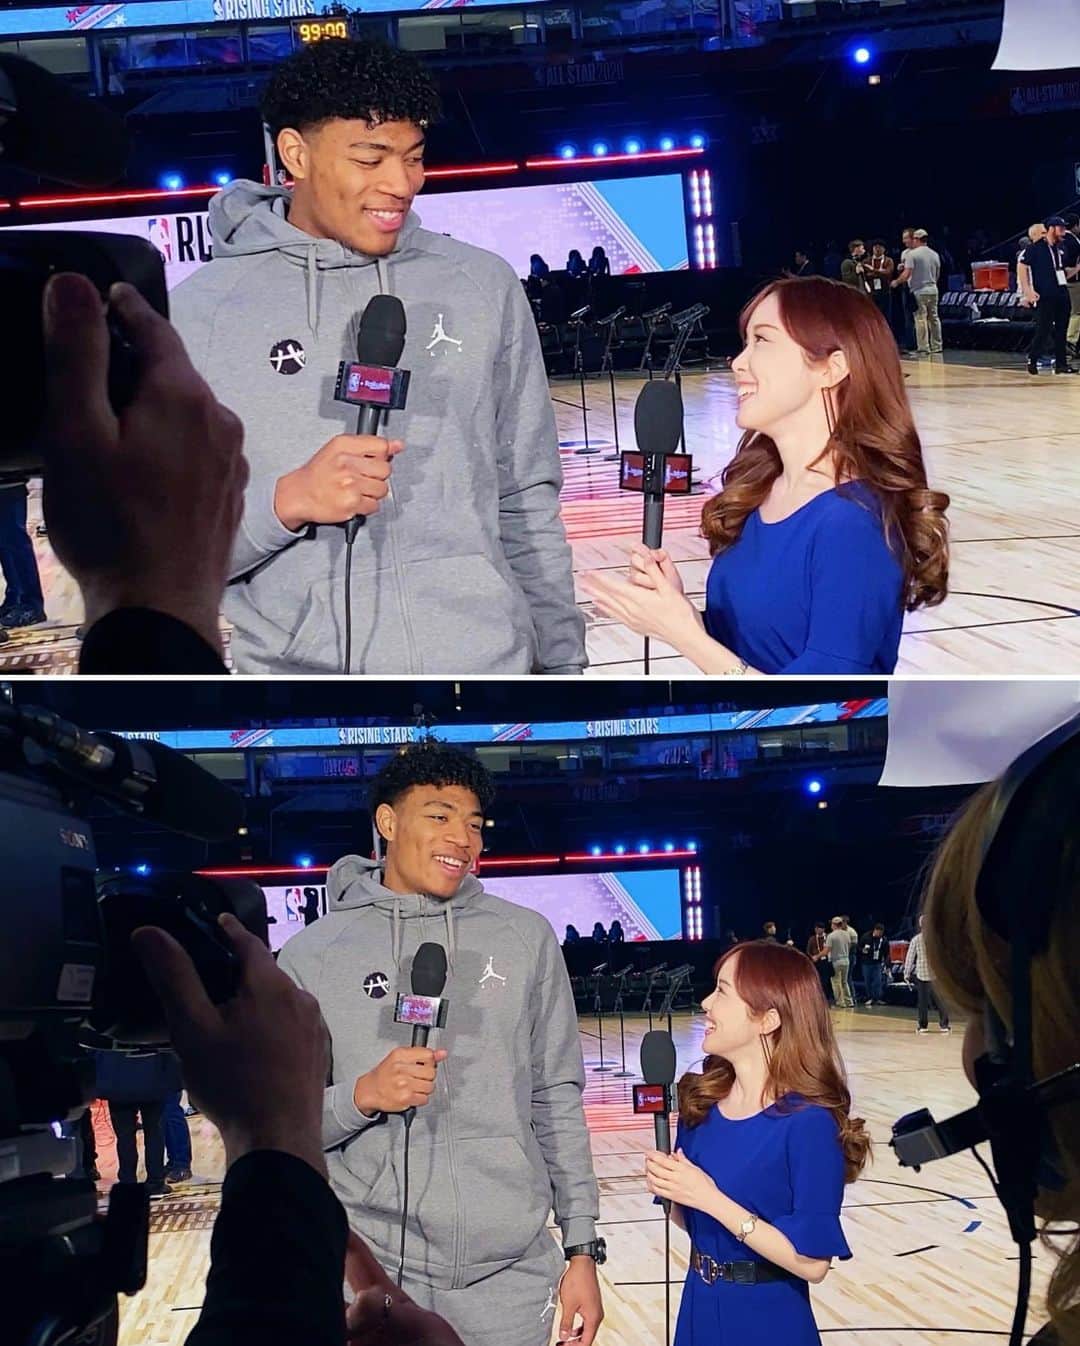 メロディー・モリタさんのインスタグラム写真 - (メロディー・モリタInstagram)「NBA All-Star 2020 in Chicago!!🏀✨ Tonight, I am interviewing one of the greatest All-Star players in history *live* from courtside before the All-Star Game! _ From the Rising Stars, I had a blast interviewing Rui Hachimura who made history by becoming the first Japanese player ever to be a part of the All-Star games! It was awesome getting to know and sharing more of his personal side + fun BTS stories with his fellow teammates and first memorable All-Star😄⭐️ _ Yesterday morning, I also had an opportunity to do a sit-down interview with Devin Booker who was selected as an All-Star this year!! He is actually one player that I've had the honor to speak with at all three All-Star Weekends I've covered. _ I asked him to share the details on when and how he found out that he was named an All-Star, his journey on how he got to where he is today, his connection and touching stories with his idol Kobe Bryant, and much more!☺️ Although he was just one point shy from being the crowned the winner of the 3-Point Contest again this year, he still holds the highest record even after the addition of two 3-balls this year. He is an unbelievable shooter and such a down-to-earth wonderful player to talk to!☺️ _ My interview with Devin and all the other players I've covered during the media session is scheduled to air in a series, so please look forward to them all on NBA Rakuten! Hope you all join in the fun for tonight's All-Star Game!!🙌🔥 _ いよいよ今日は、オールスターゲーム！ 今年大注目の 「あの!!」 オールスターゲーム出場選手に、試合前コートサイドでインタビューを行う予定です‼️ NBA Rakutenでの生放送もありますので、引き続き是非ご覧ください！果たしてどの選手が来るのか?! どうぞお楽しみに！😆 * 初日のAll-Star Rising Starsでは、NBA史上初の日本人プレイヤーとして出場した #八村塁 選手に試合前のコートサイドで単独インタビューをさせて頂きました！✨ ウィザーズ、そして オールスターでの面白エピソードや舞台裏についてのお話には、八村選手とチームメイト達との和気藹々さとお人柄が伝わってくる、とてもホッコリ癒されるインタビューとなりました☺️ * そして昨日は3Pコンテスト前に、オールスターゲーム初出場となった #デビンブッカー 選手に2018年と2019年に続き、今年３度目の単独インタビューを10分間も行いました!!✨ 今回のお話は、初出場する事が決定した瞬間の詳しいお話、コービーとの素敵な想い出、ここまでの道のり、メンタリティー、NBAを目指す人々へのアドバイス、コンテストとオールスターについて、更には東京オリンピックに向けての挑戦や日本の皆様へのメッセージなどなど！3Pコンテストでは惜しくも１点の差で最後に破れてしまいましたが、アリーナ中をハラハラドキドキ大いに楽しませてくれました。 * 一昨日、昨日と囲みインタビューでも様々な選手達から沢山のコメントを頂きましたので、そちらもお楽しみに！😊 #NBA #NBAAllStar #NBARakuten #RuiHachimura #DevinBooker」2月17日 1時45分 - melodeemorita